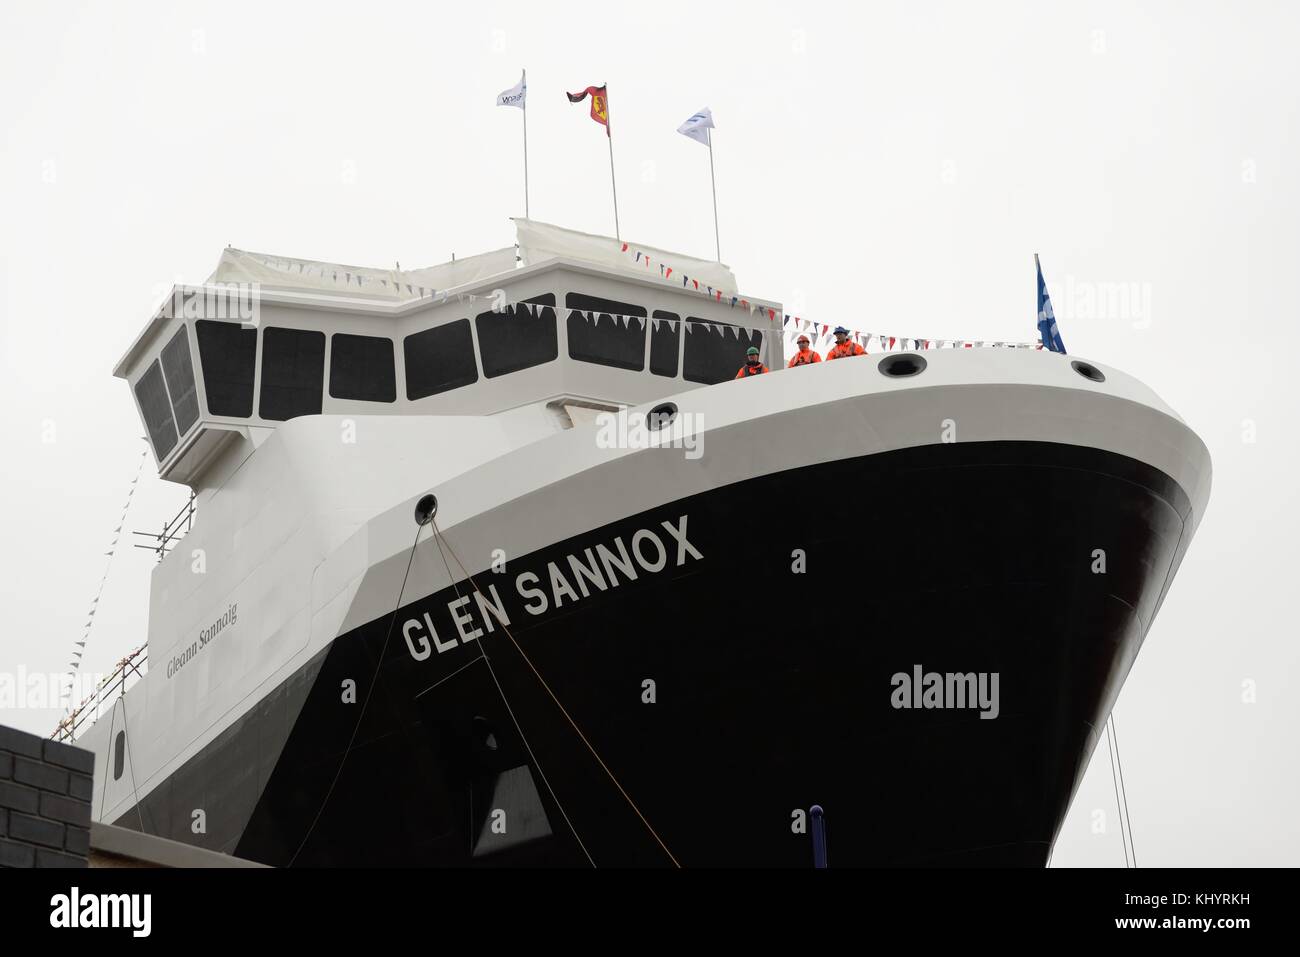 21st Nov, 2017. The Glen Sannox car ferry being prepared for launch in Port Glasgow on the river Clyde by First Minister of Scotland. Stock Photo